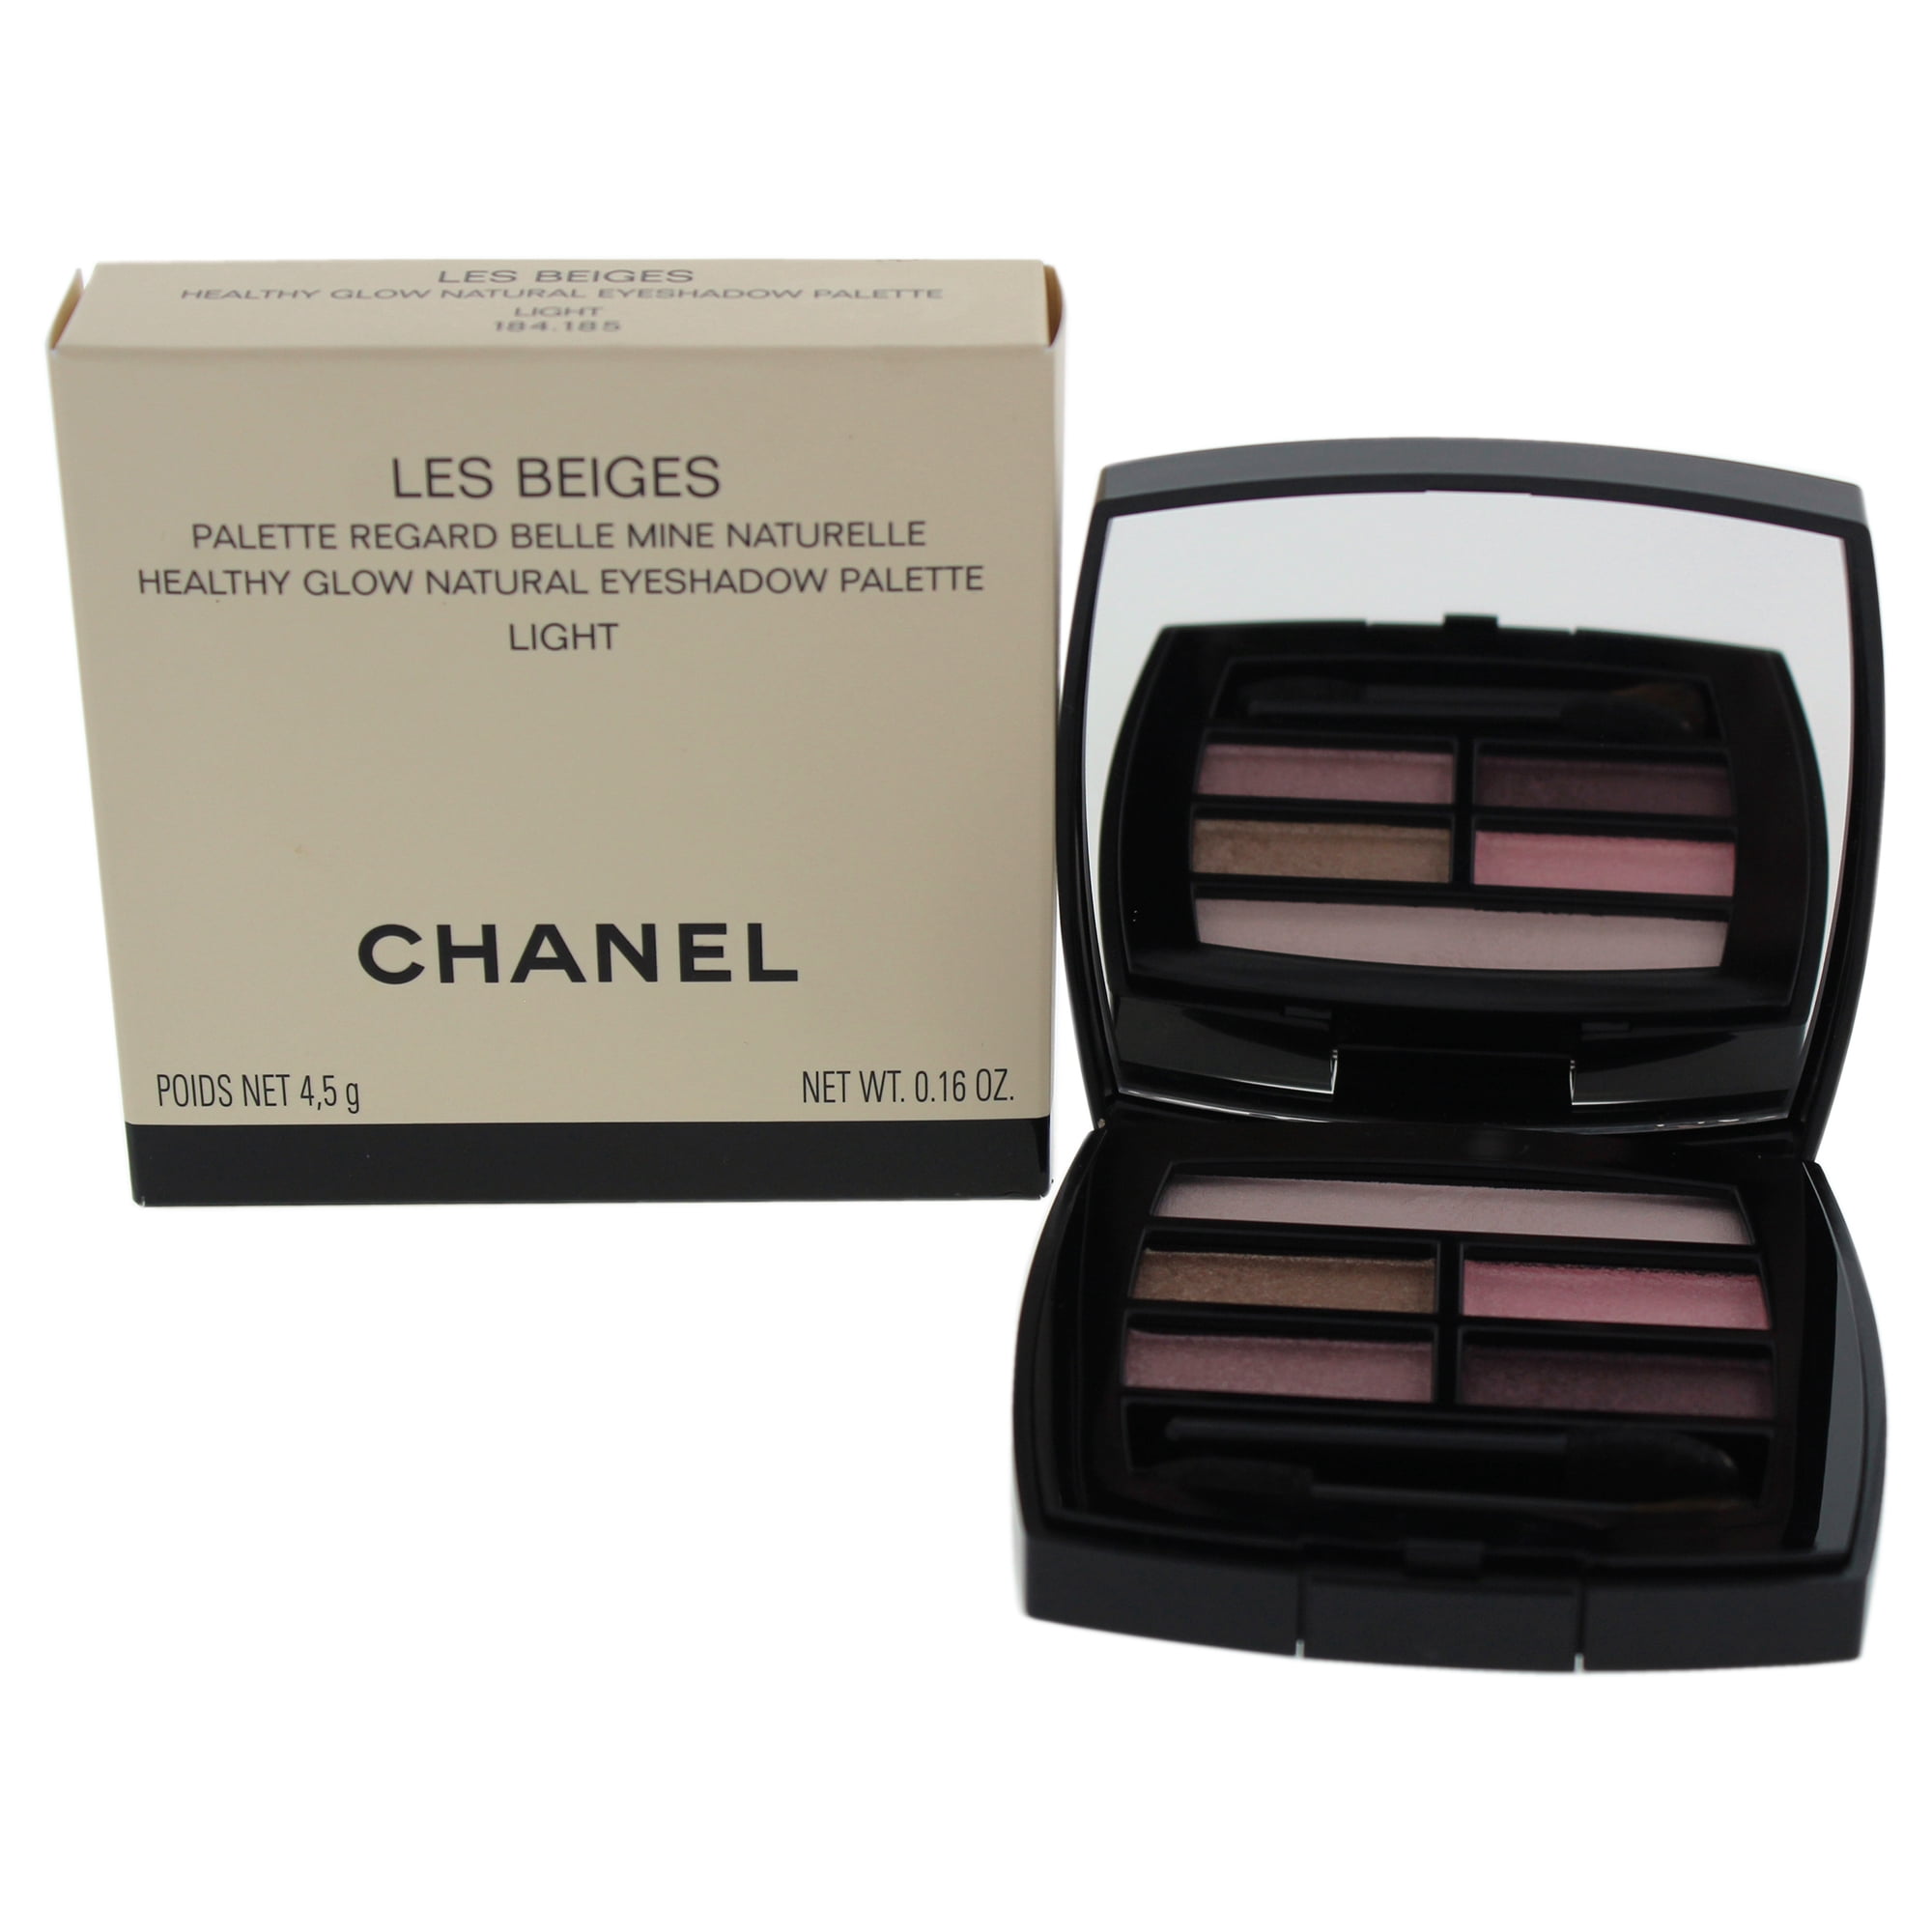 Les Beiges Healthy Glow Natural Eyeshadow Palette - Light by Chanel for  Women - 0.16 oz Eye Shadow